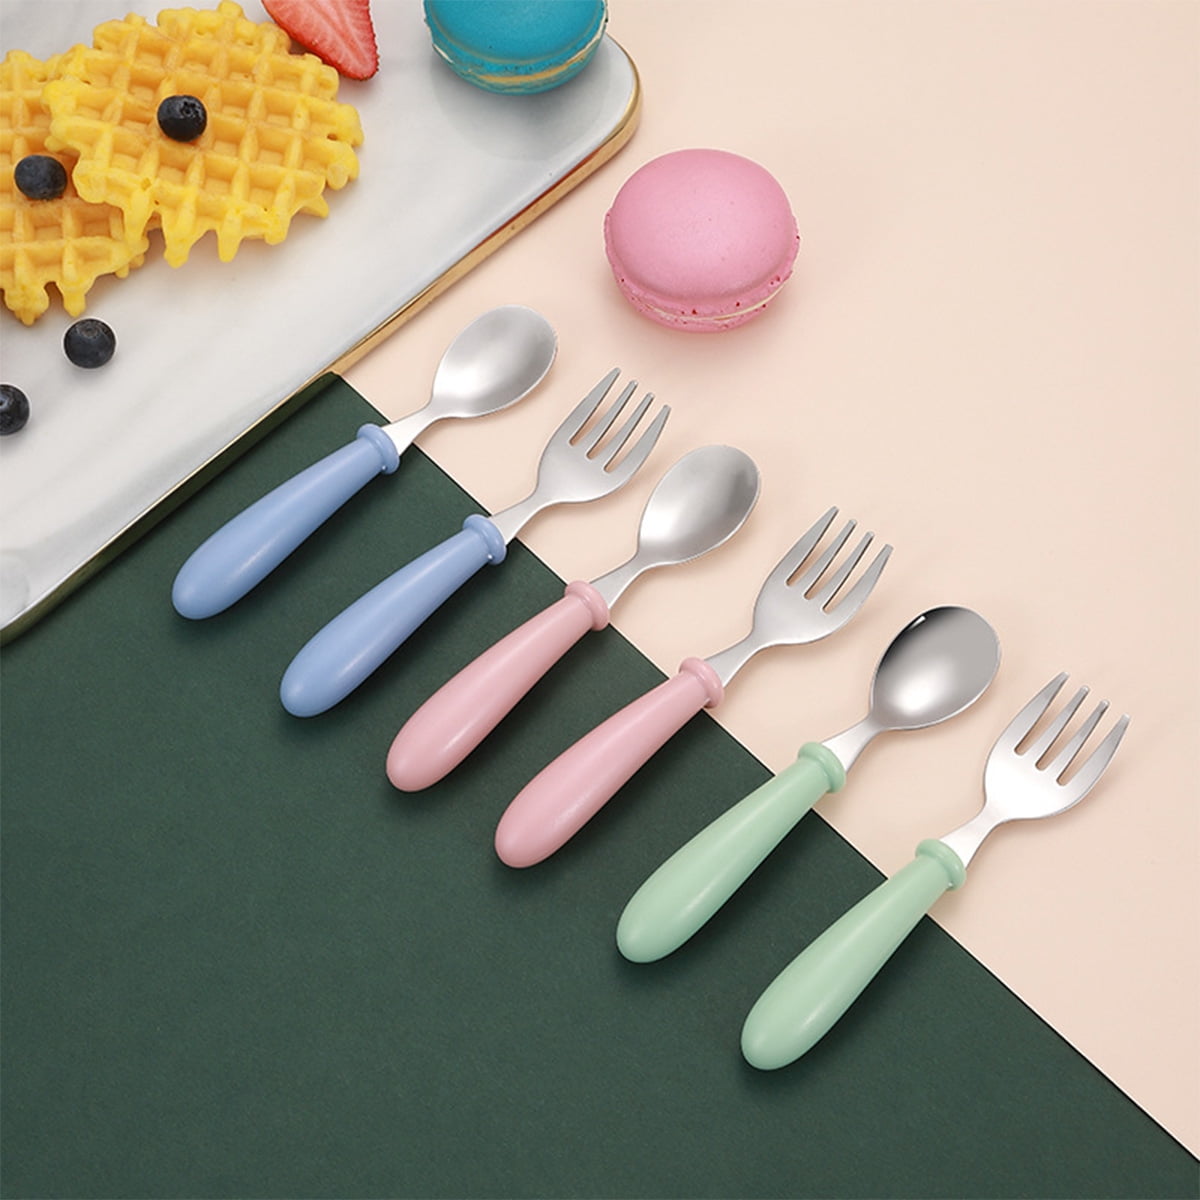 3-Piece Toddler Stainless Steel Utensils: Interlocking Blocks of Spoon, Fork & Knife. Fun, Safe & Durable Brick Toy Tableware for Kids. Ideal for